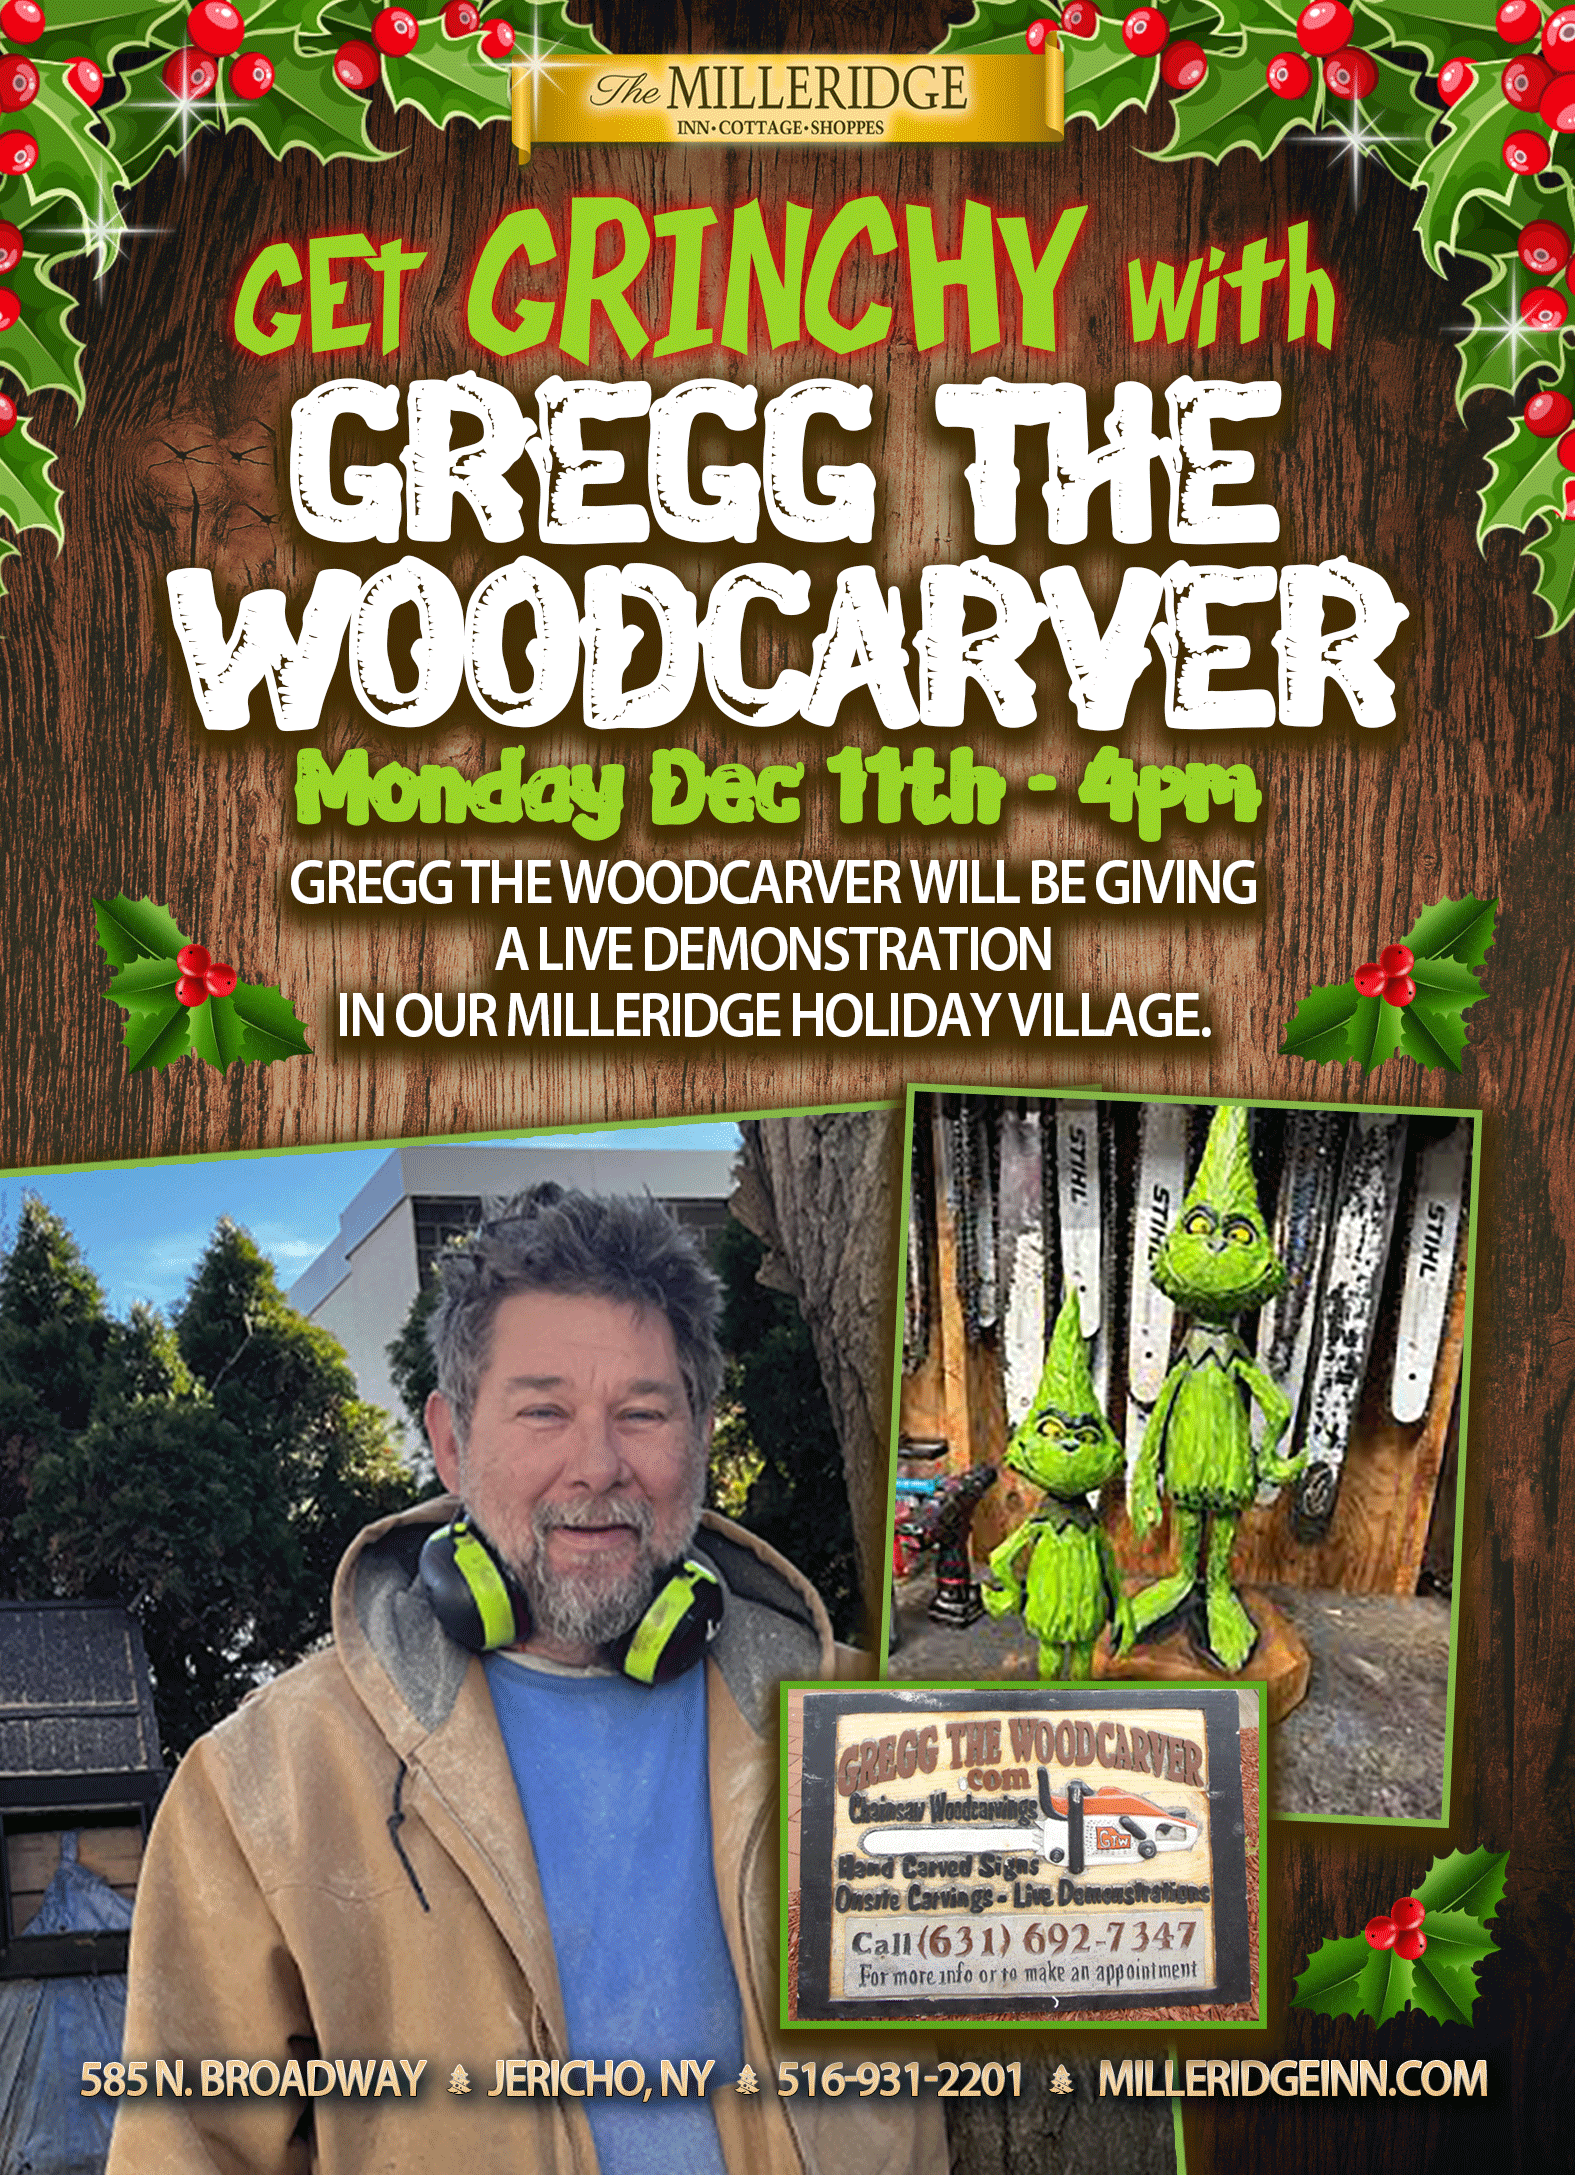 Get Grinchy with Greg the Woodcarver